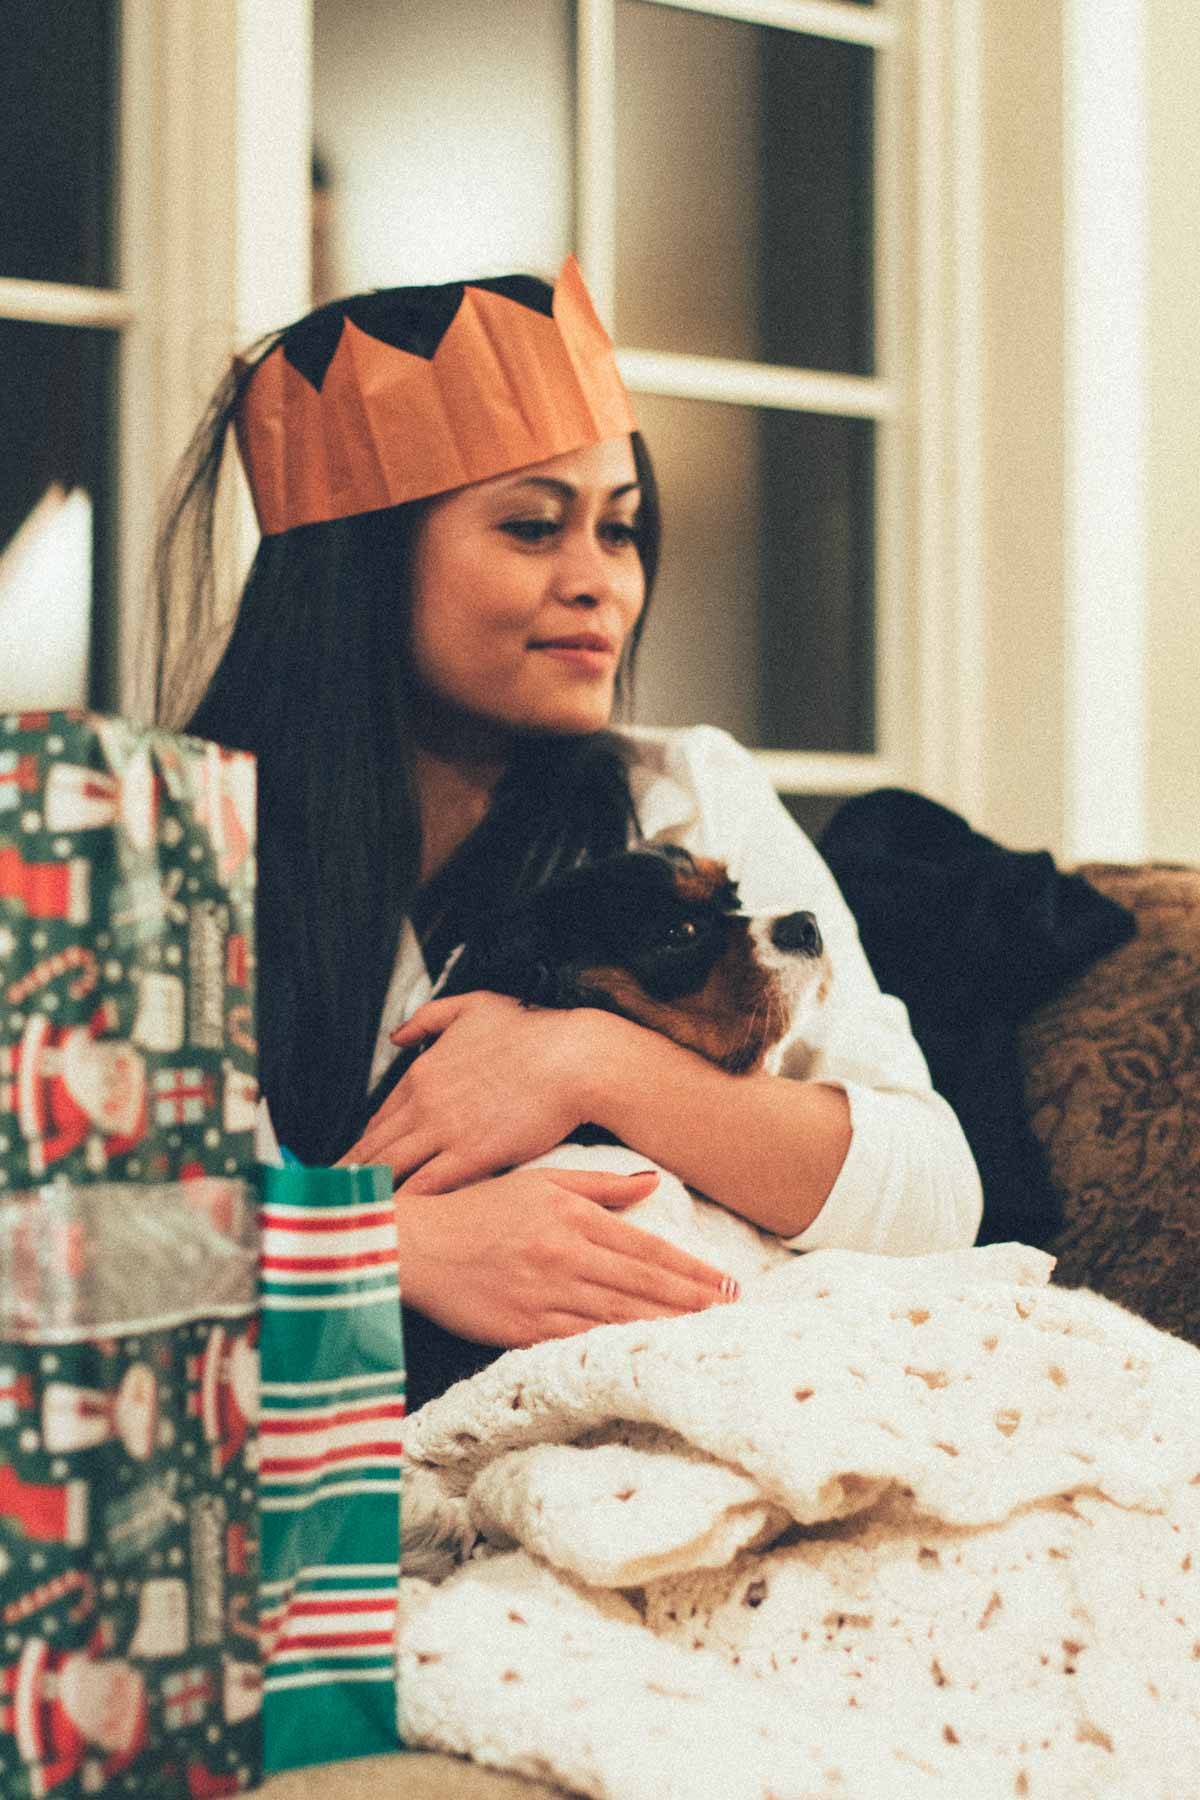 Girl wearing a paper crown holding a dog.